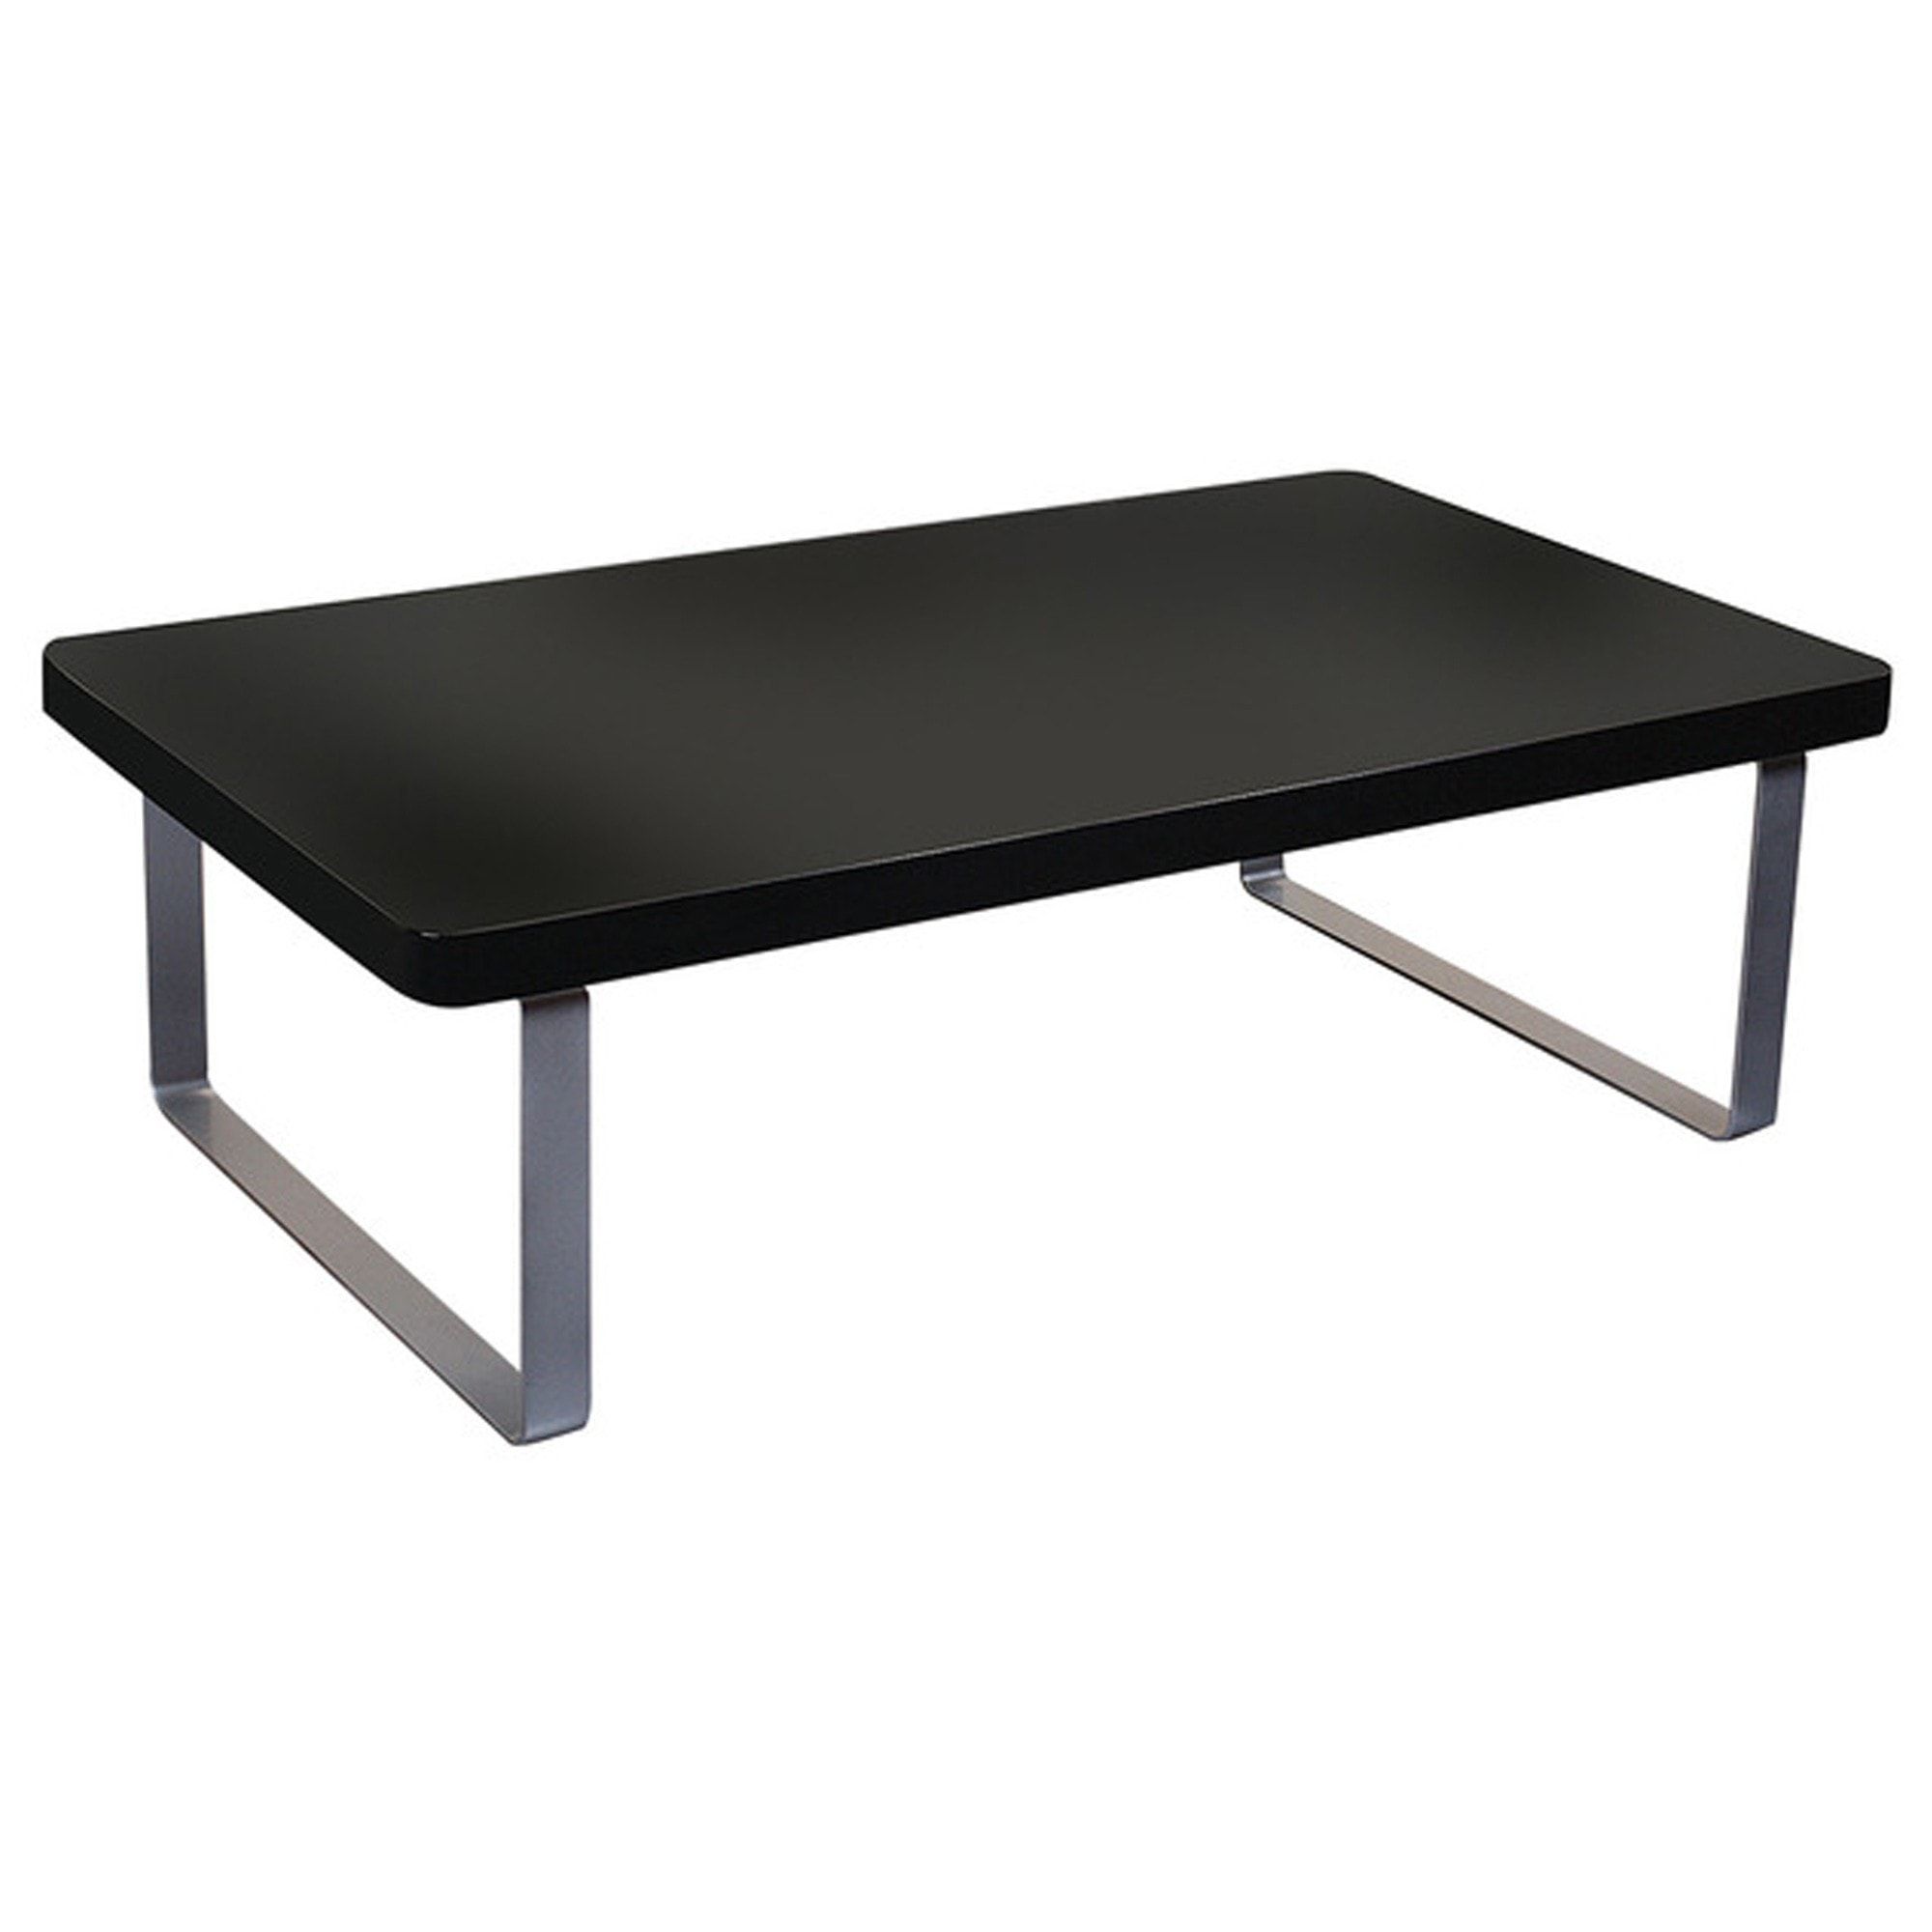 Accent Black High Gloss Coffee Table | Black Coffee Table Pertaining To High Gloss Black Coffee Tables (Gallery 4 of 20)